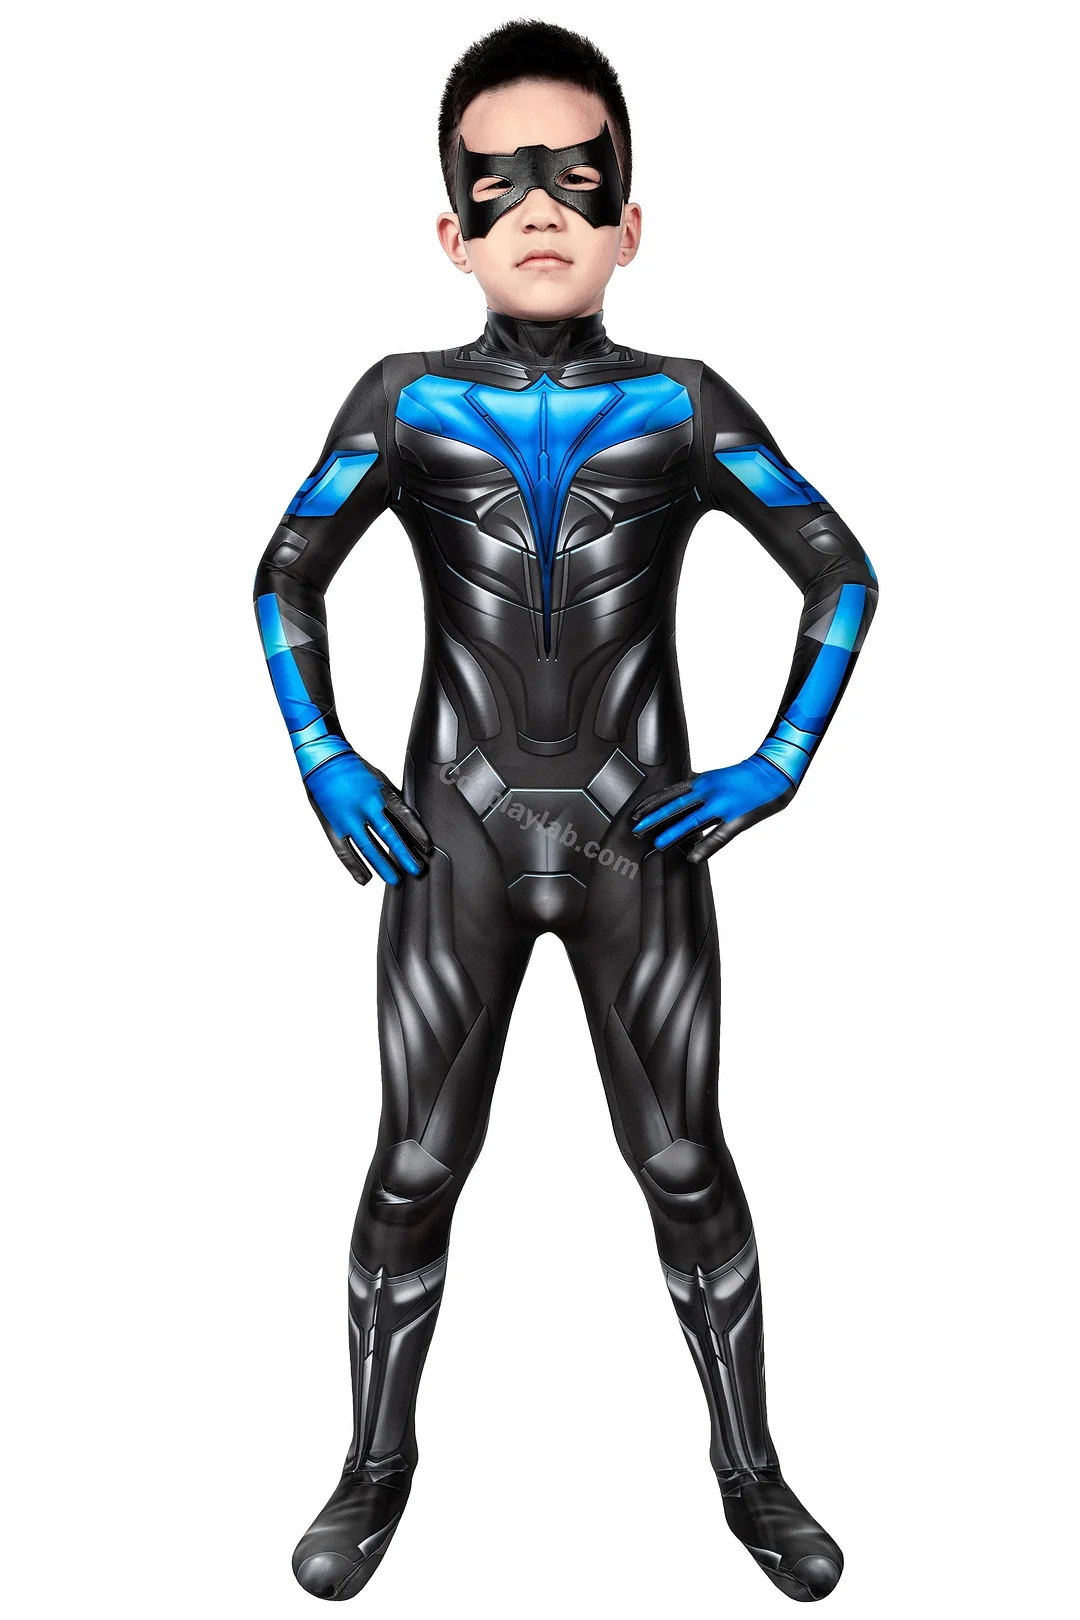 Kids Titans Nightwing Cosplay Suit 3D Printed Costume For Children By CosplayLab